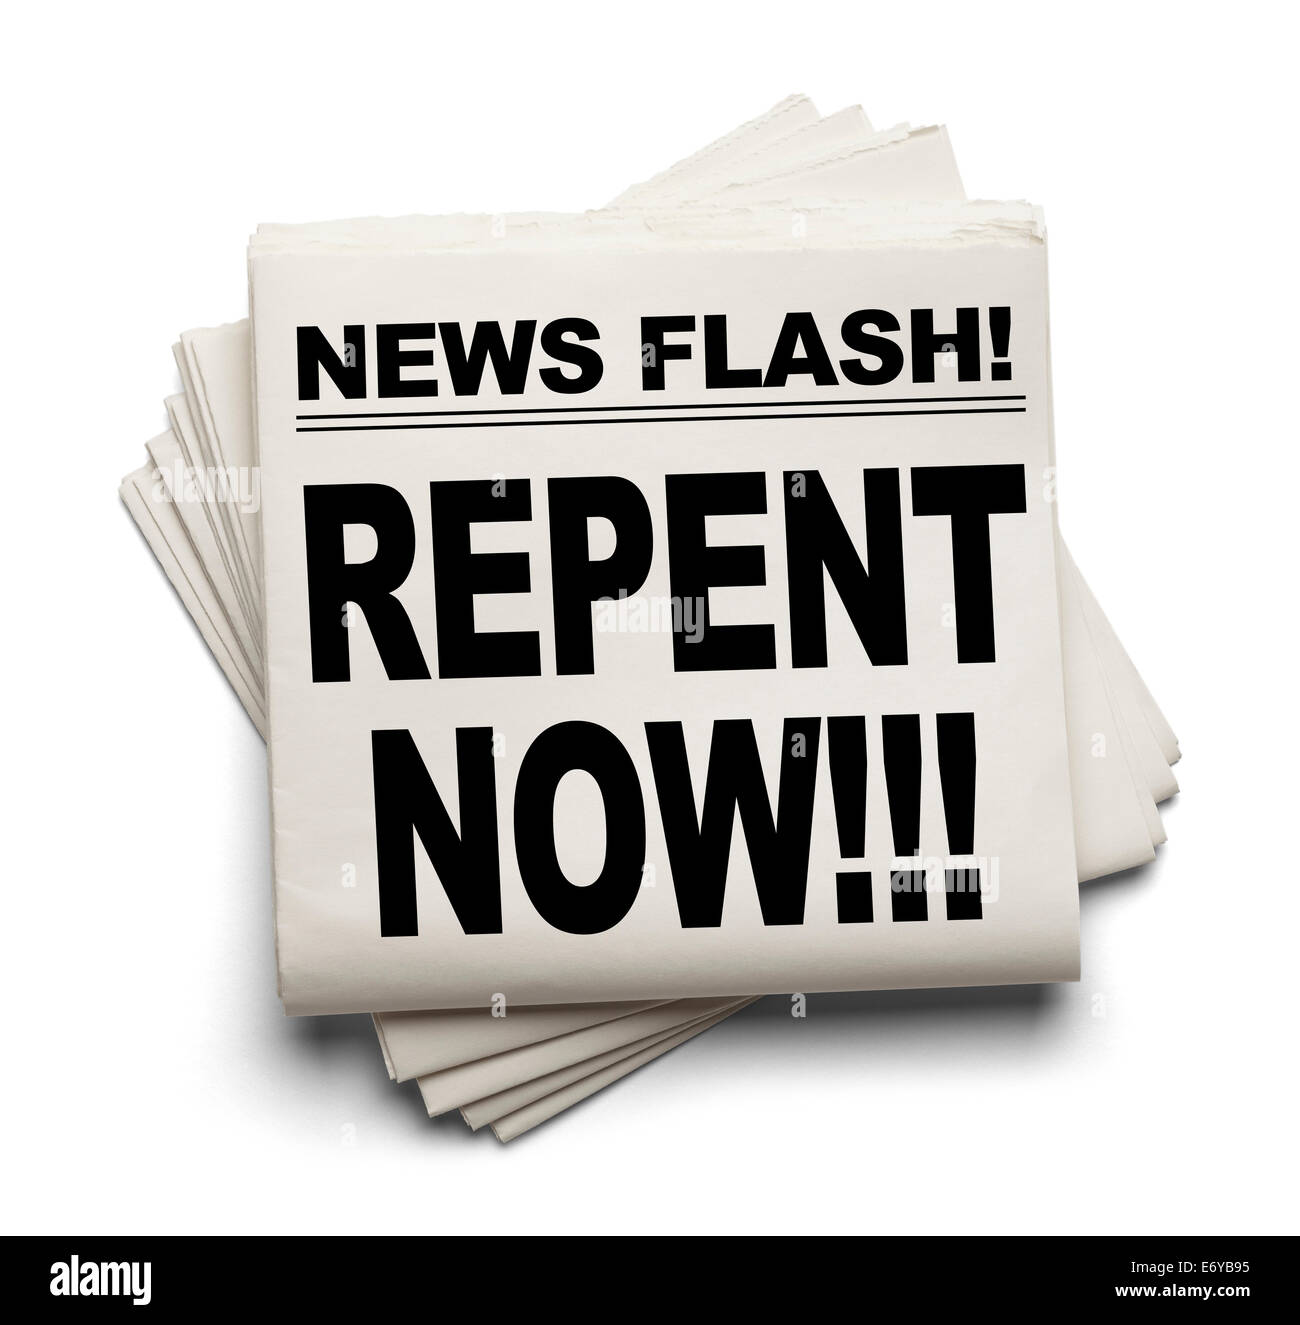 News Flash Repent Now News Paper Isolated on White Background. Stock Photo